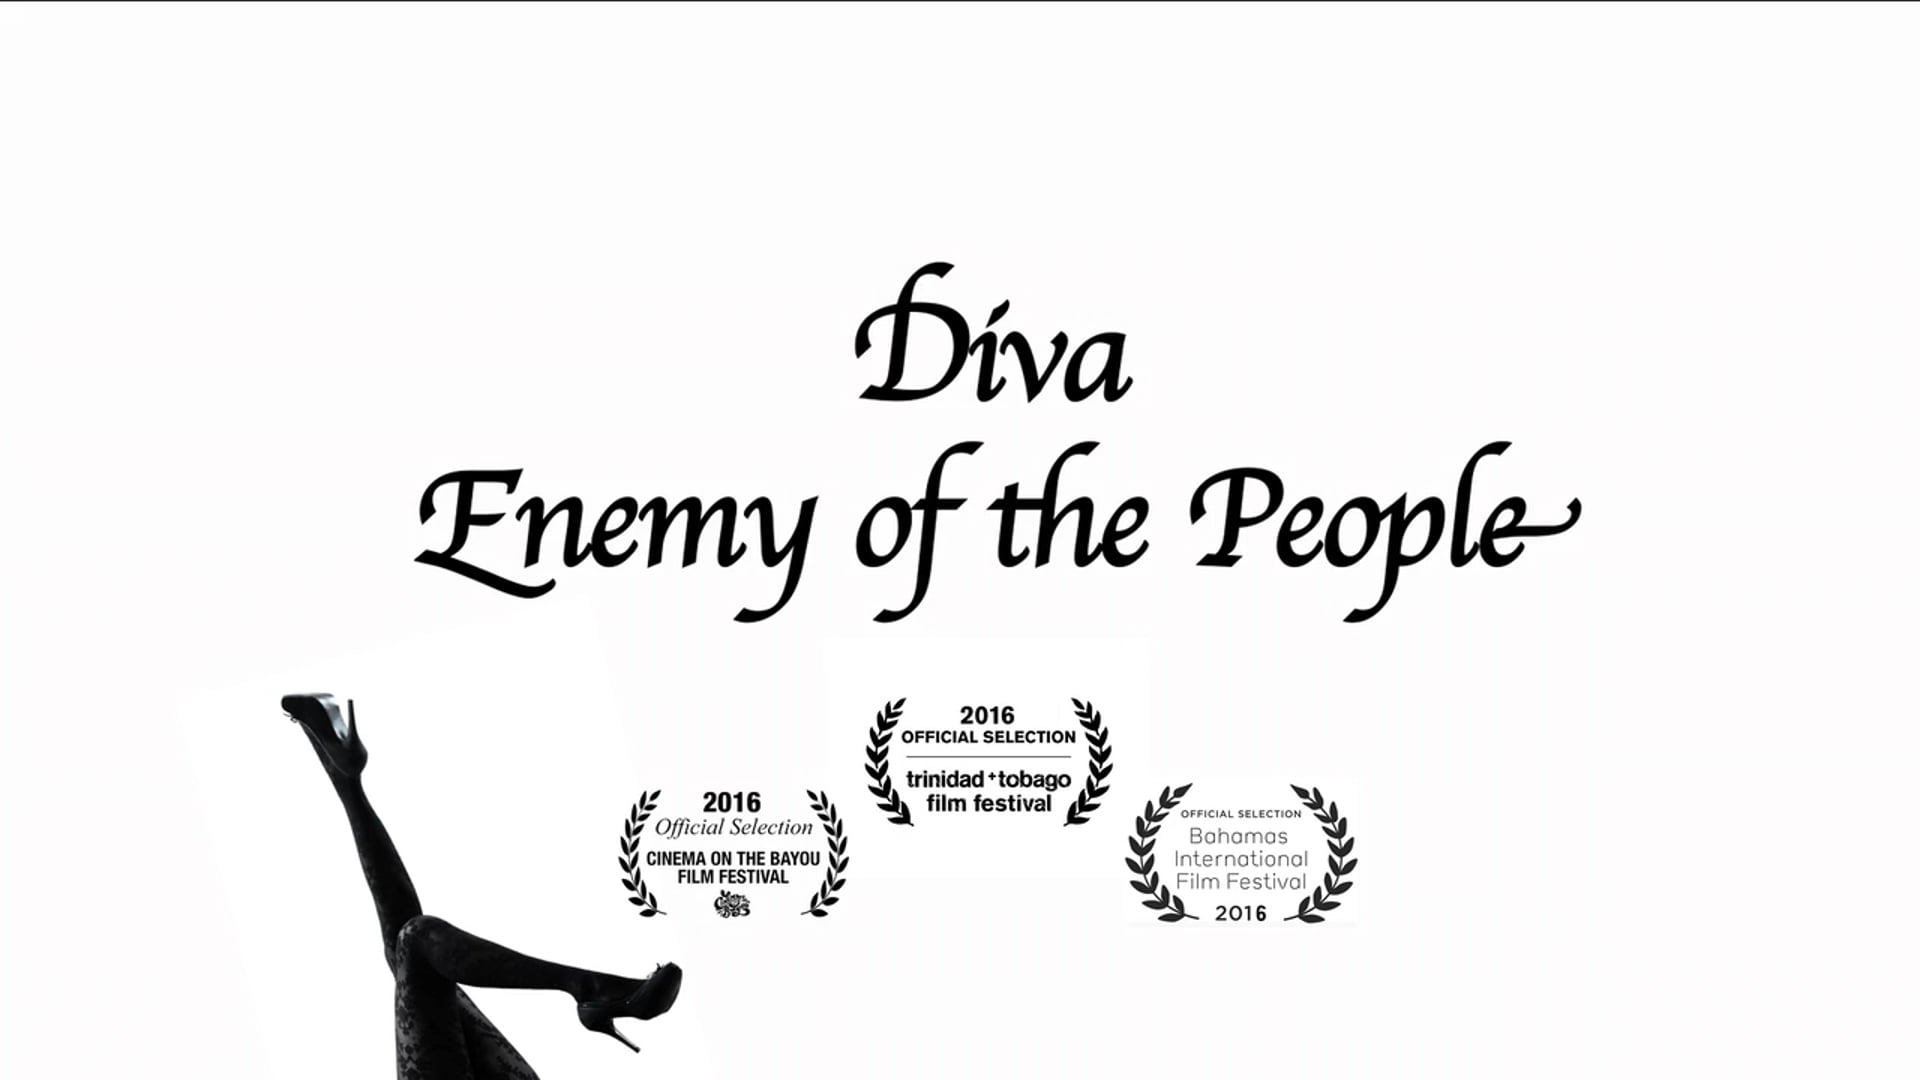 Diva - Enemy of the People 2018 Trailer